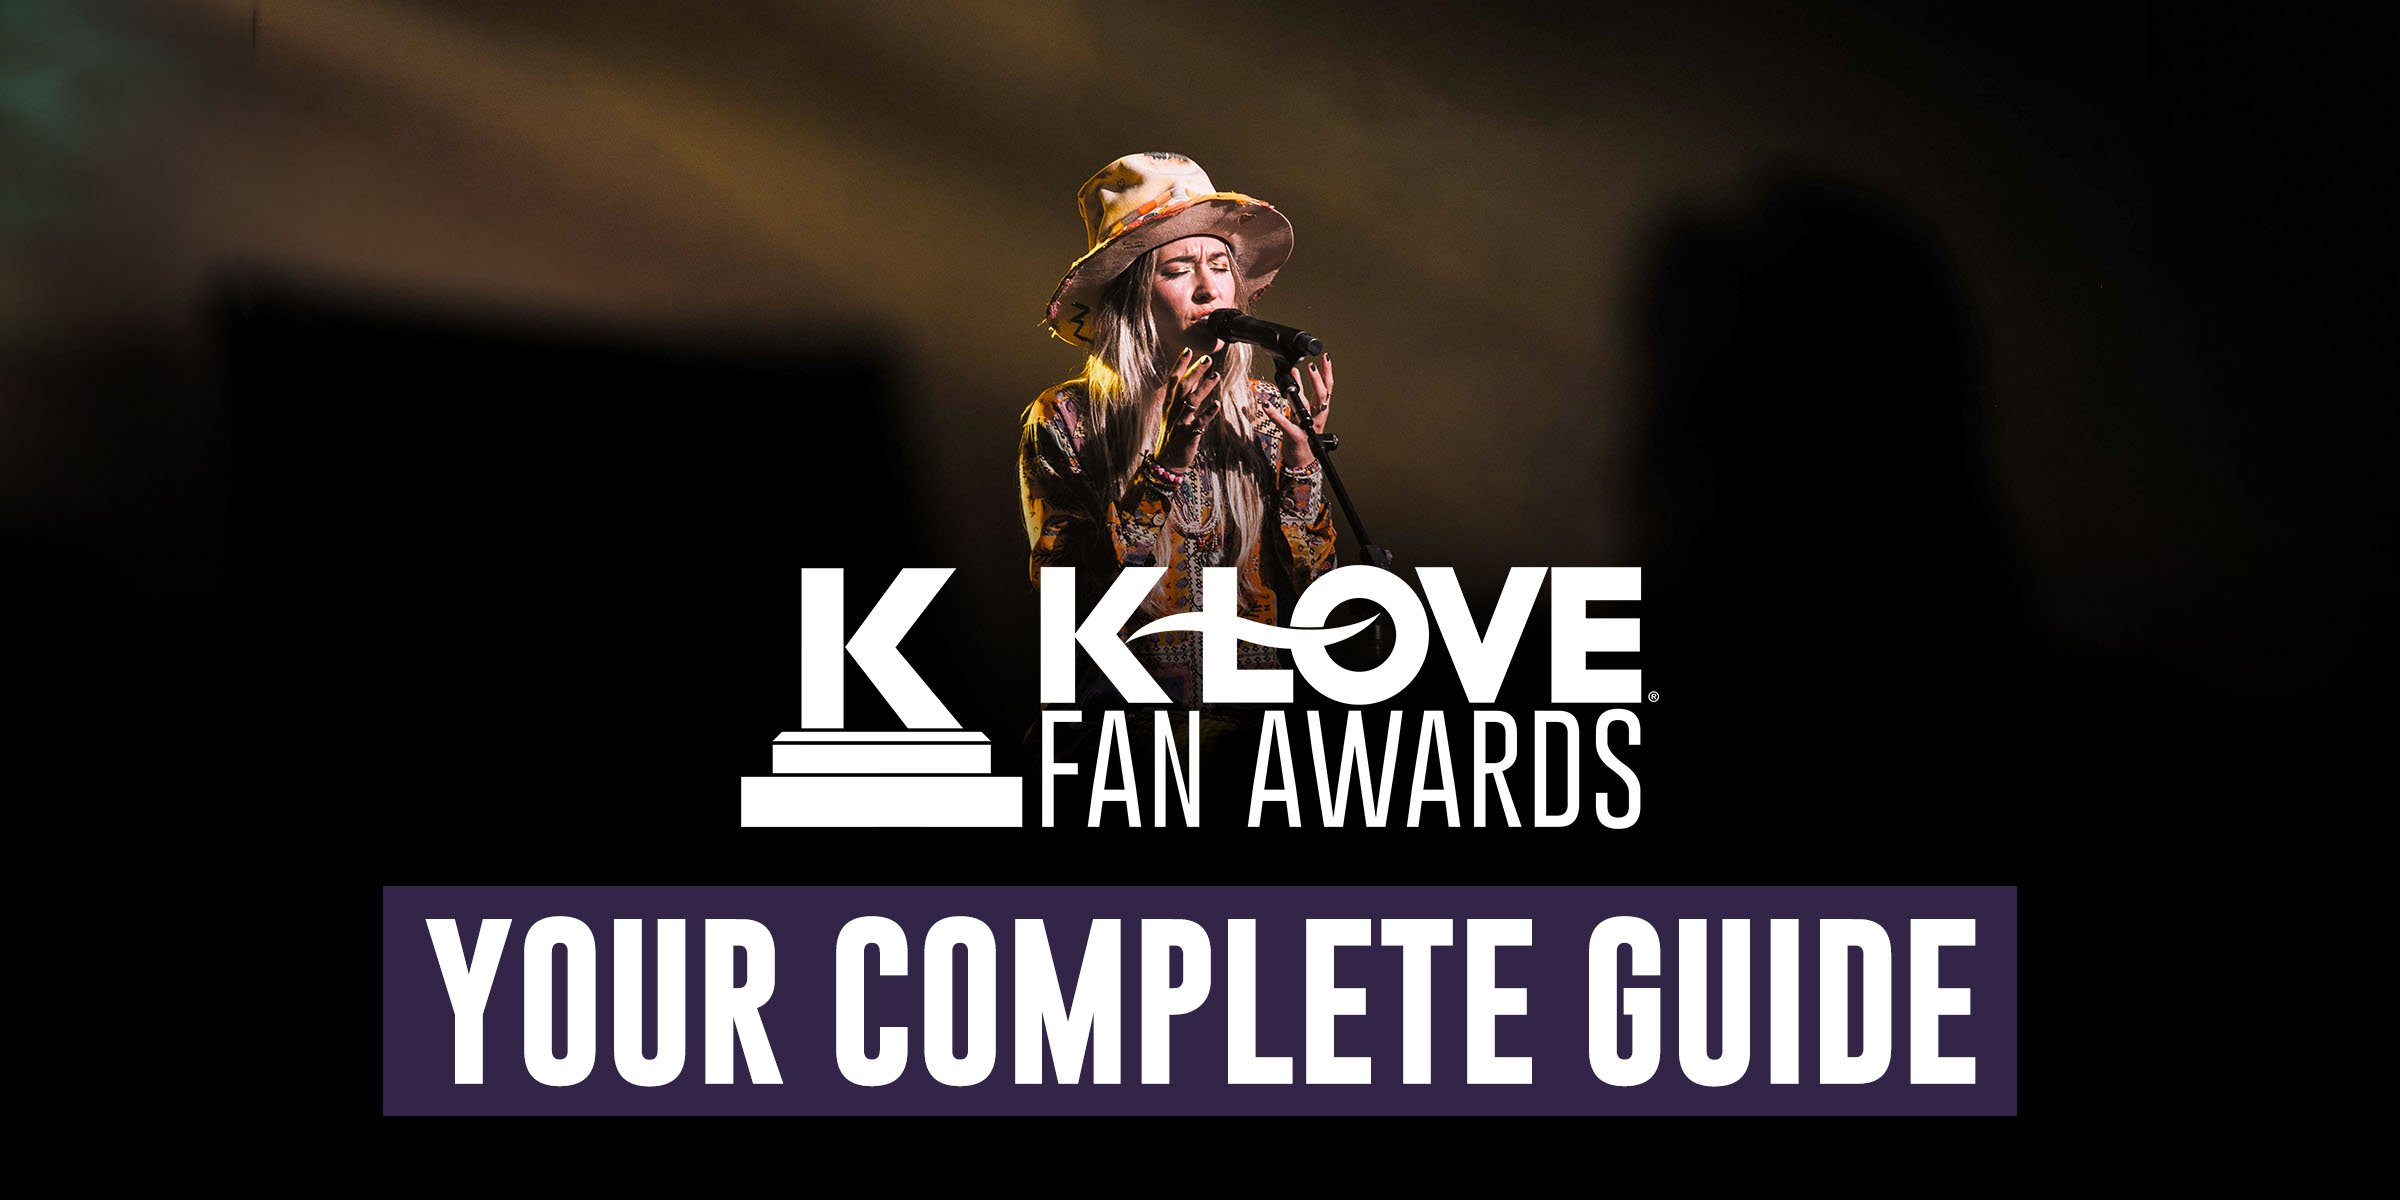 K-LOVE Fan Awards: Your Complete Guide